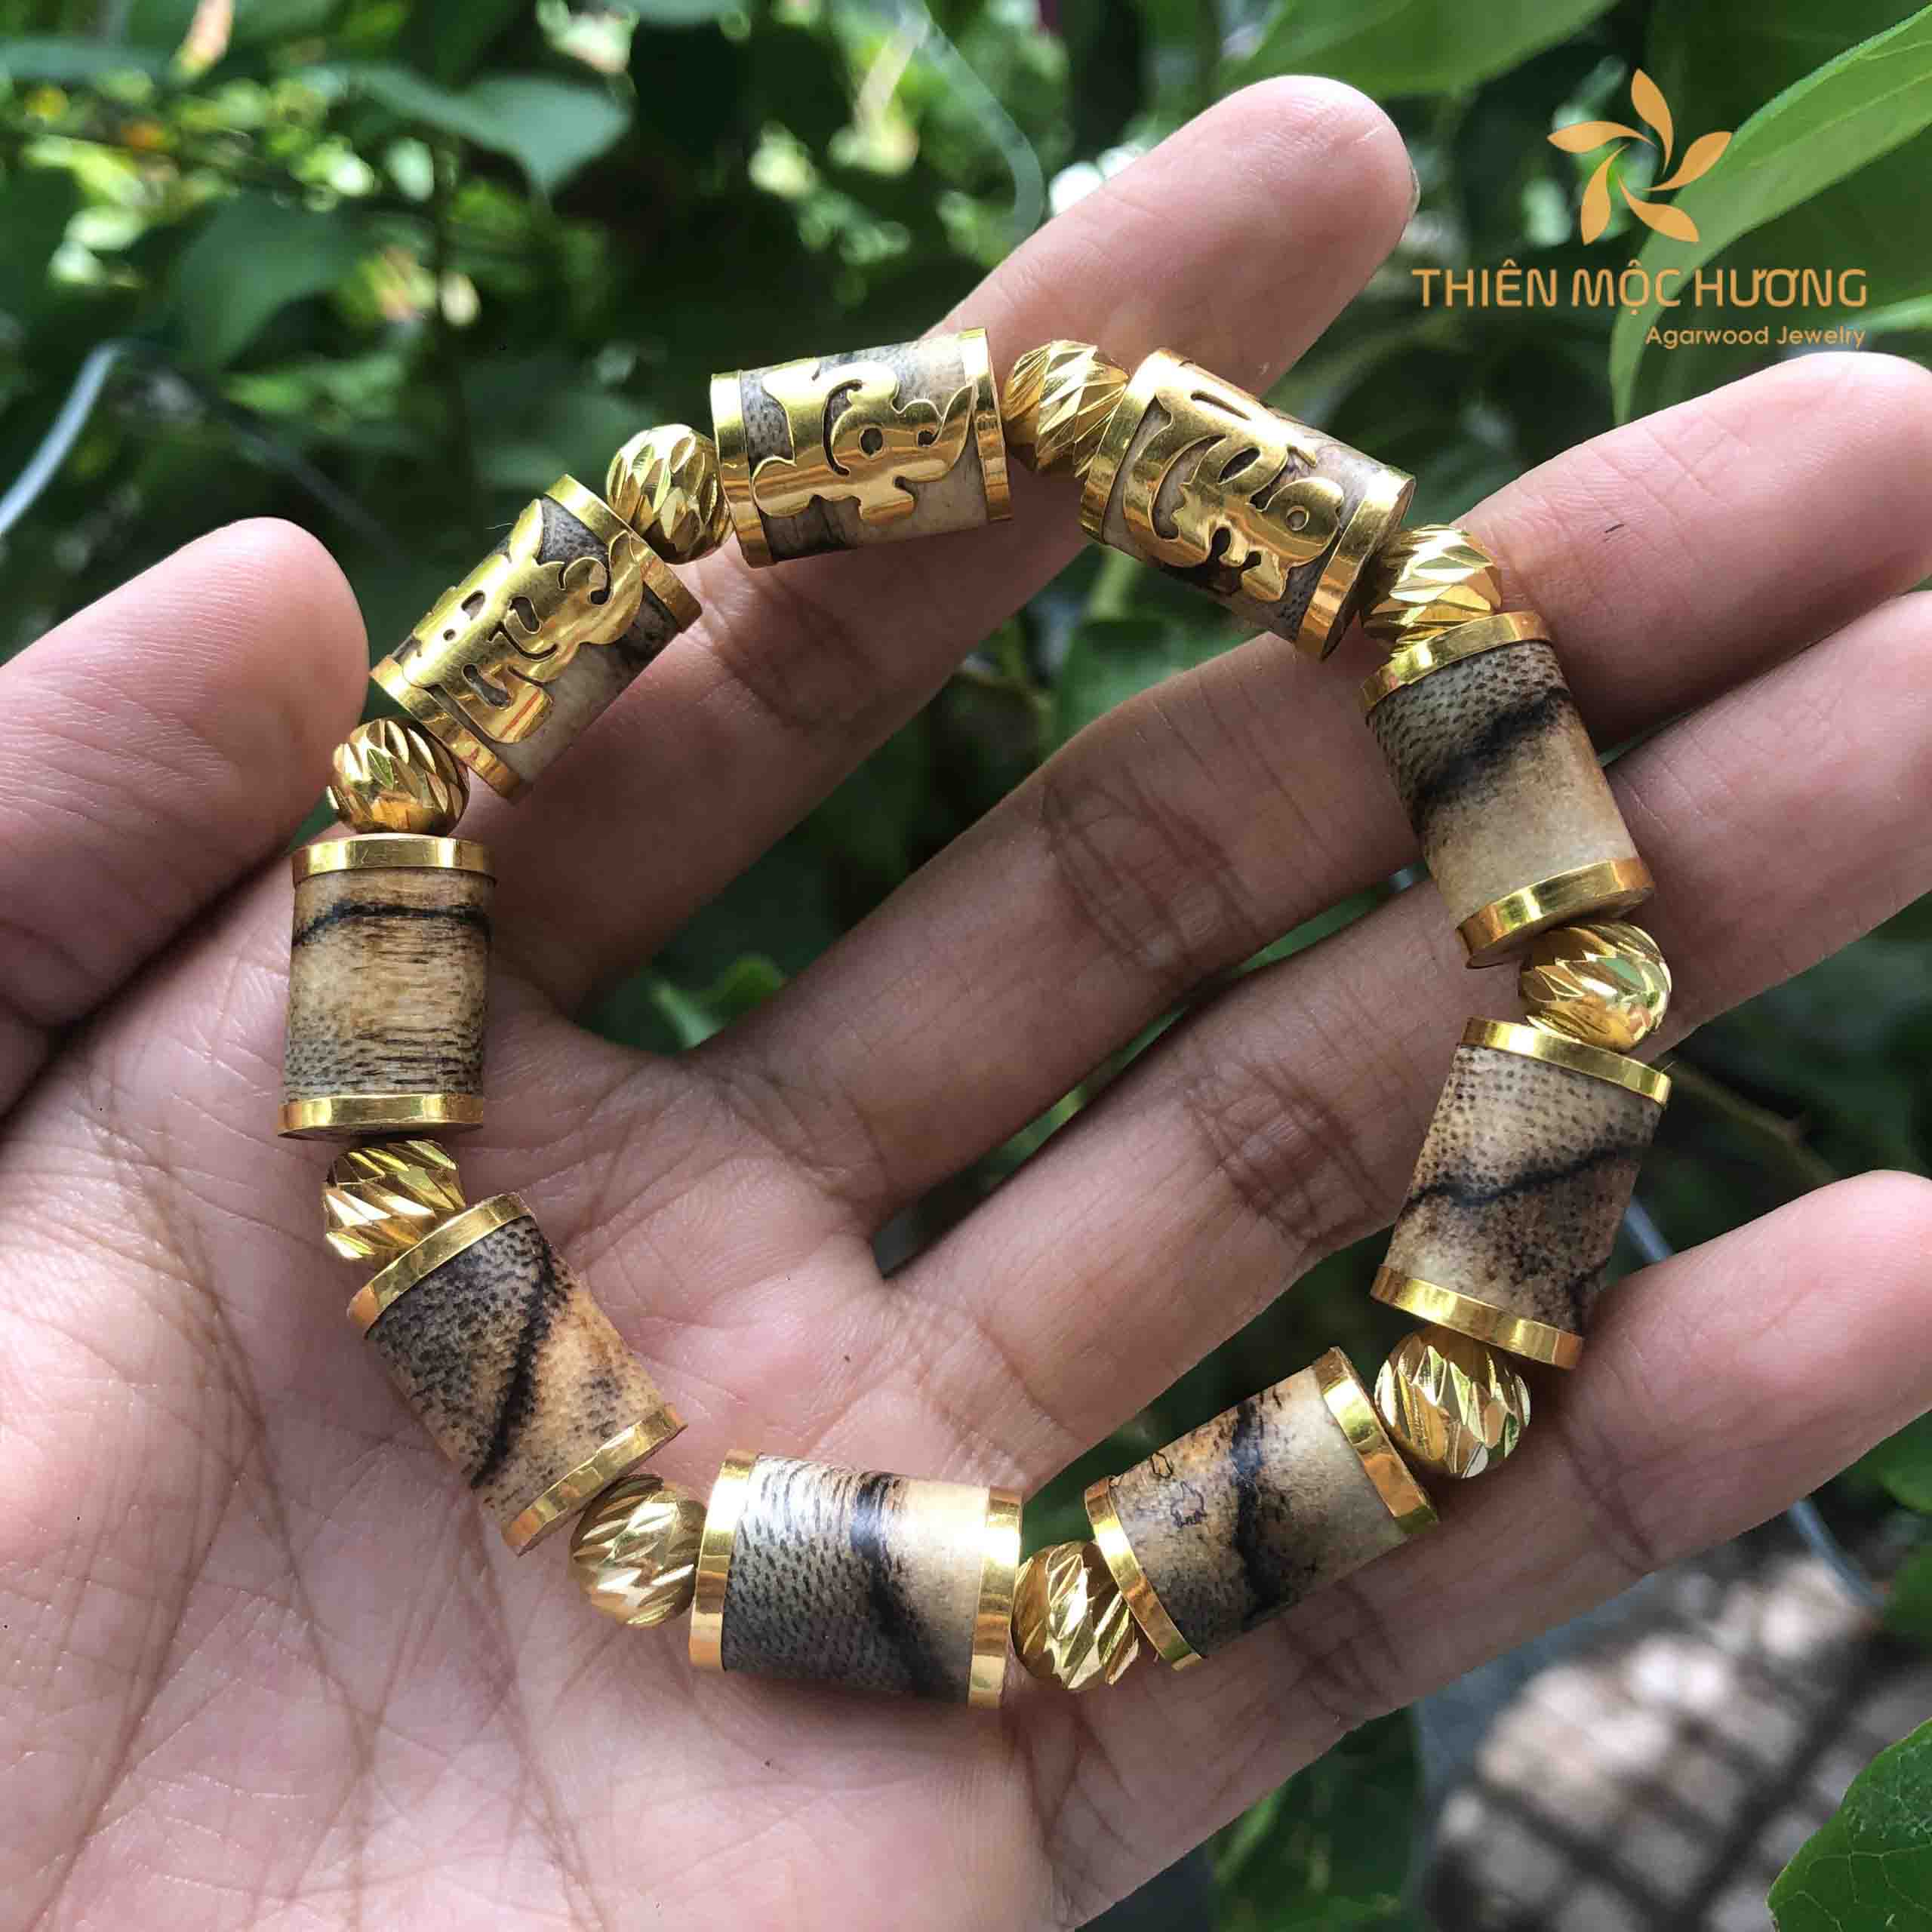 To ensure the longevity and beauty of your Agarwood Bracelet, proper care is essential